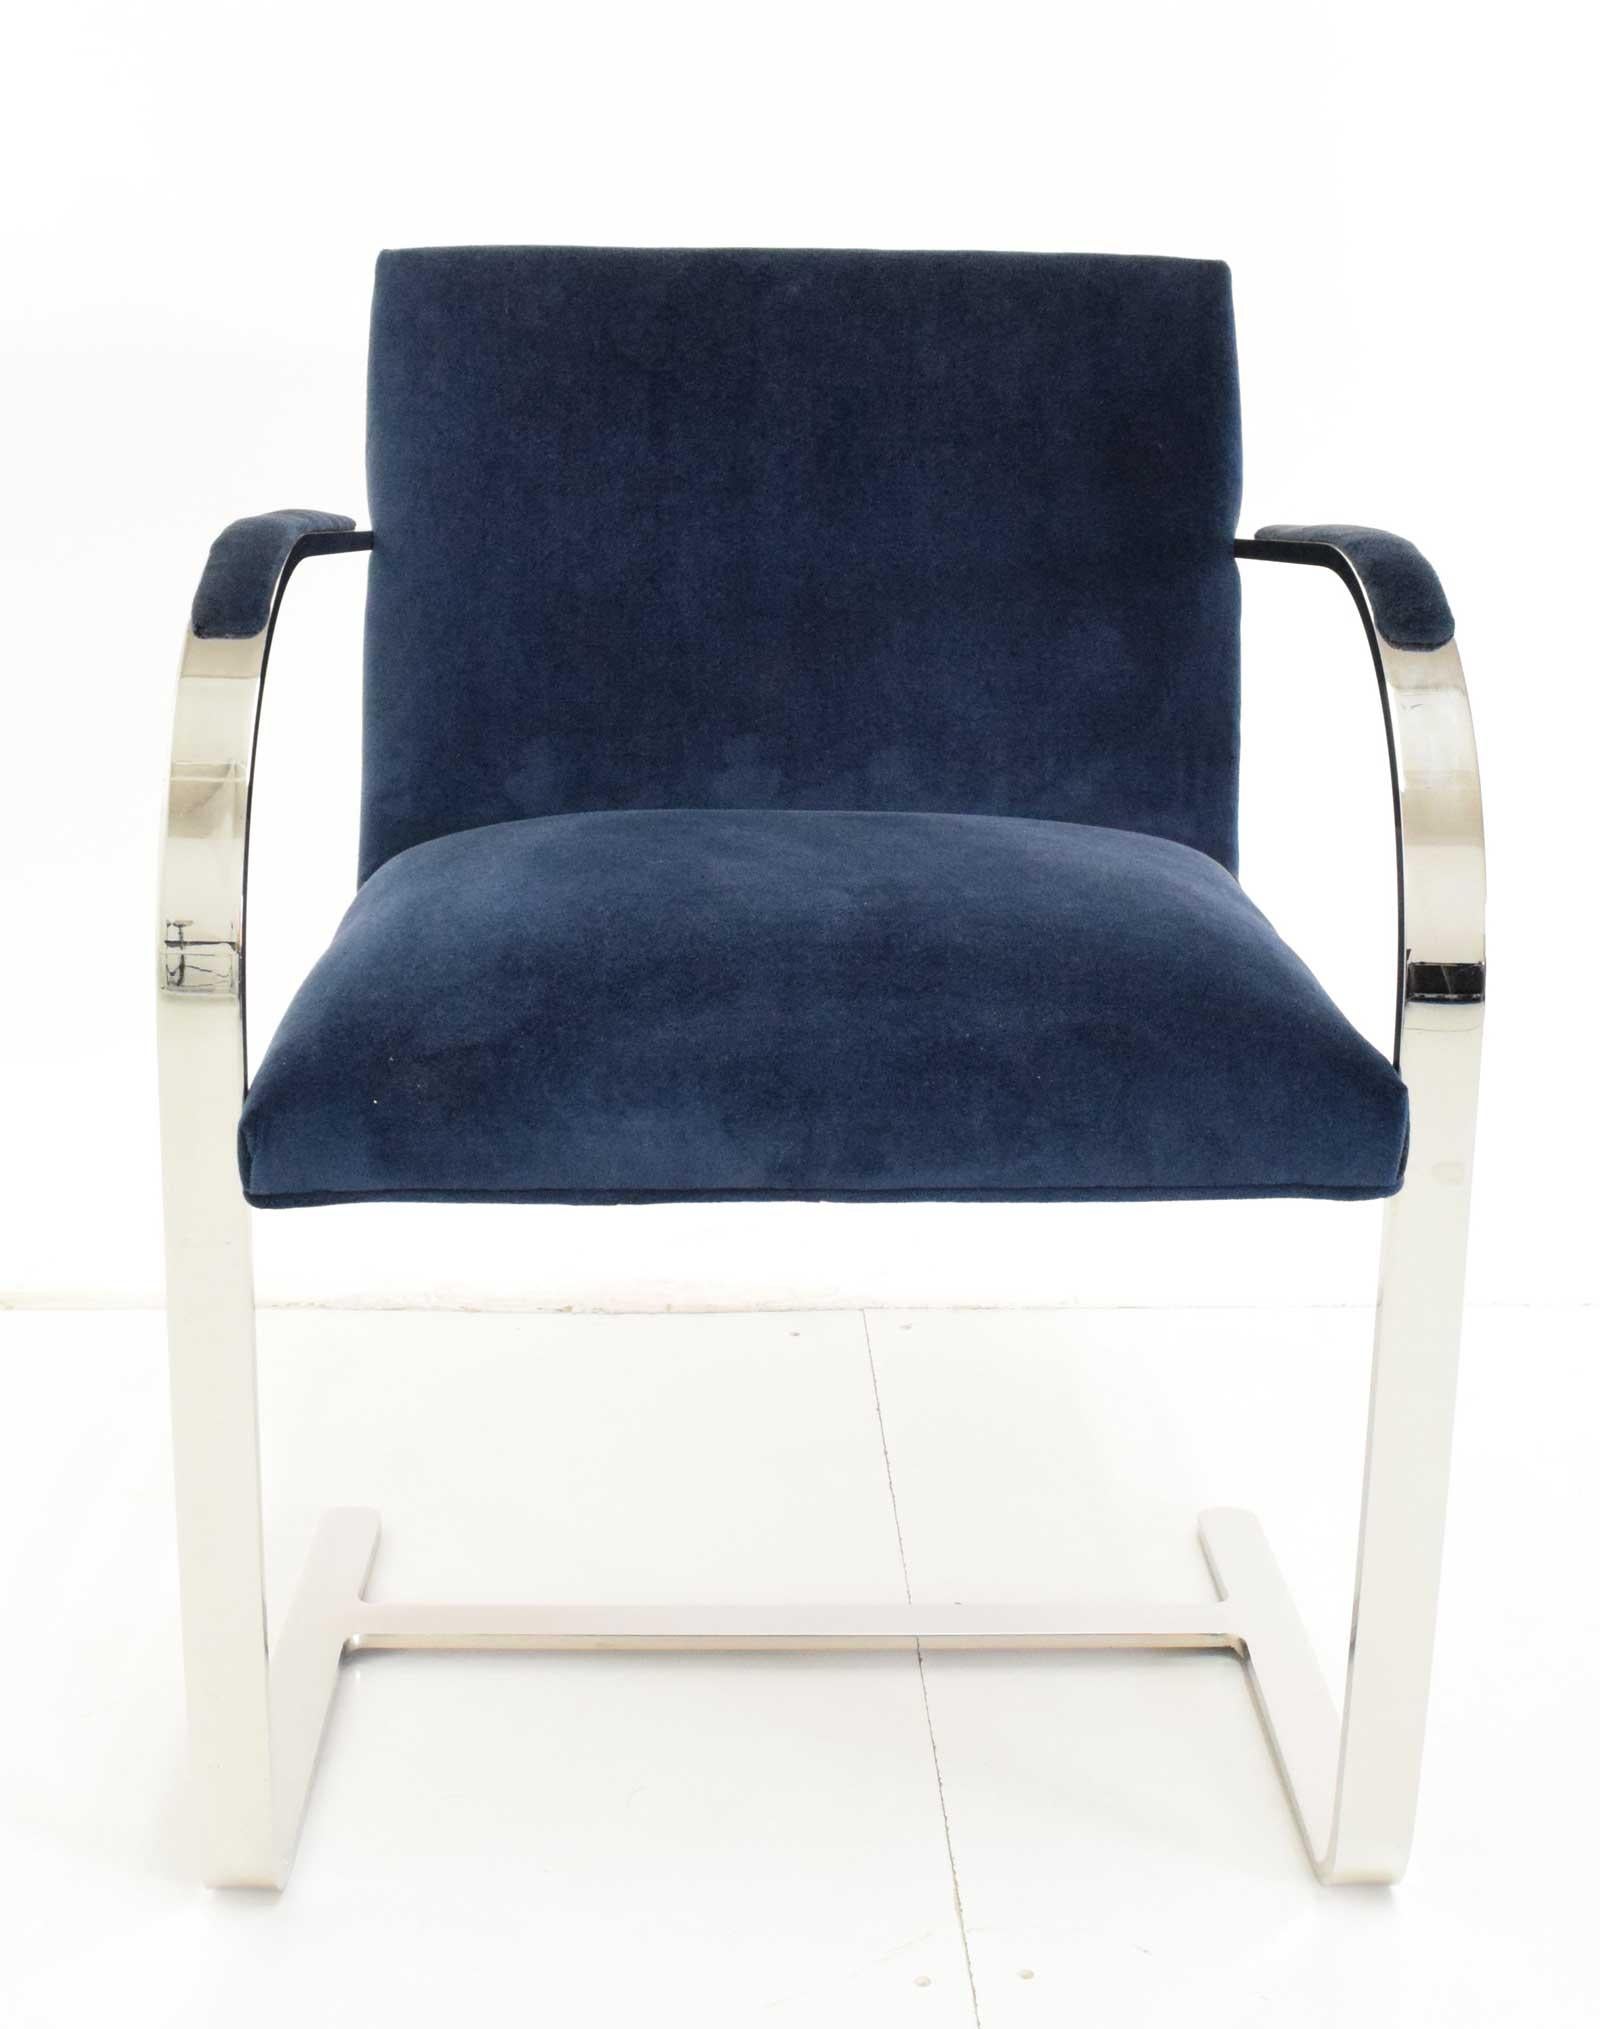 Brno chairs designed by Mies van der Rohe. Chairs are upholstered in a blue velvet. They show wonderfully. Chairs are stainless steel and include the padded arms.

Chairs are ready to go.

We prefer to sell in pairs. Only four available.